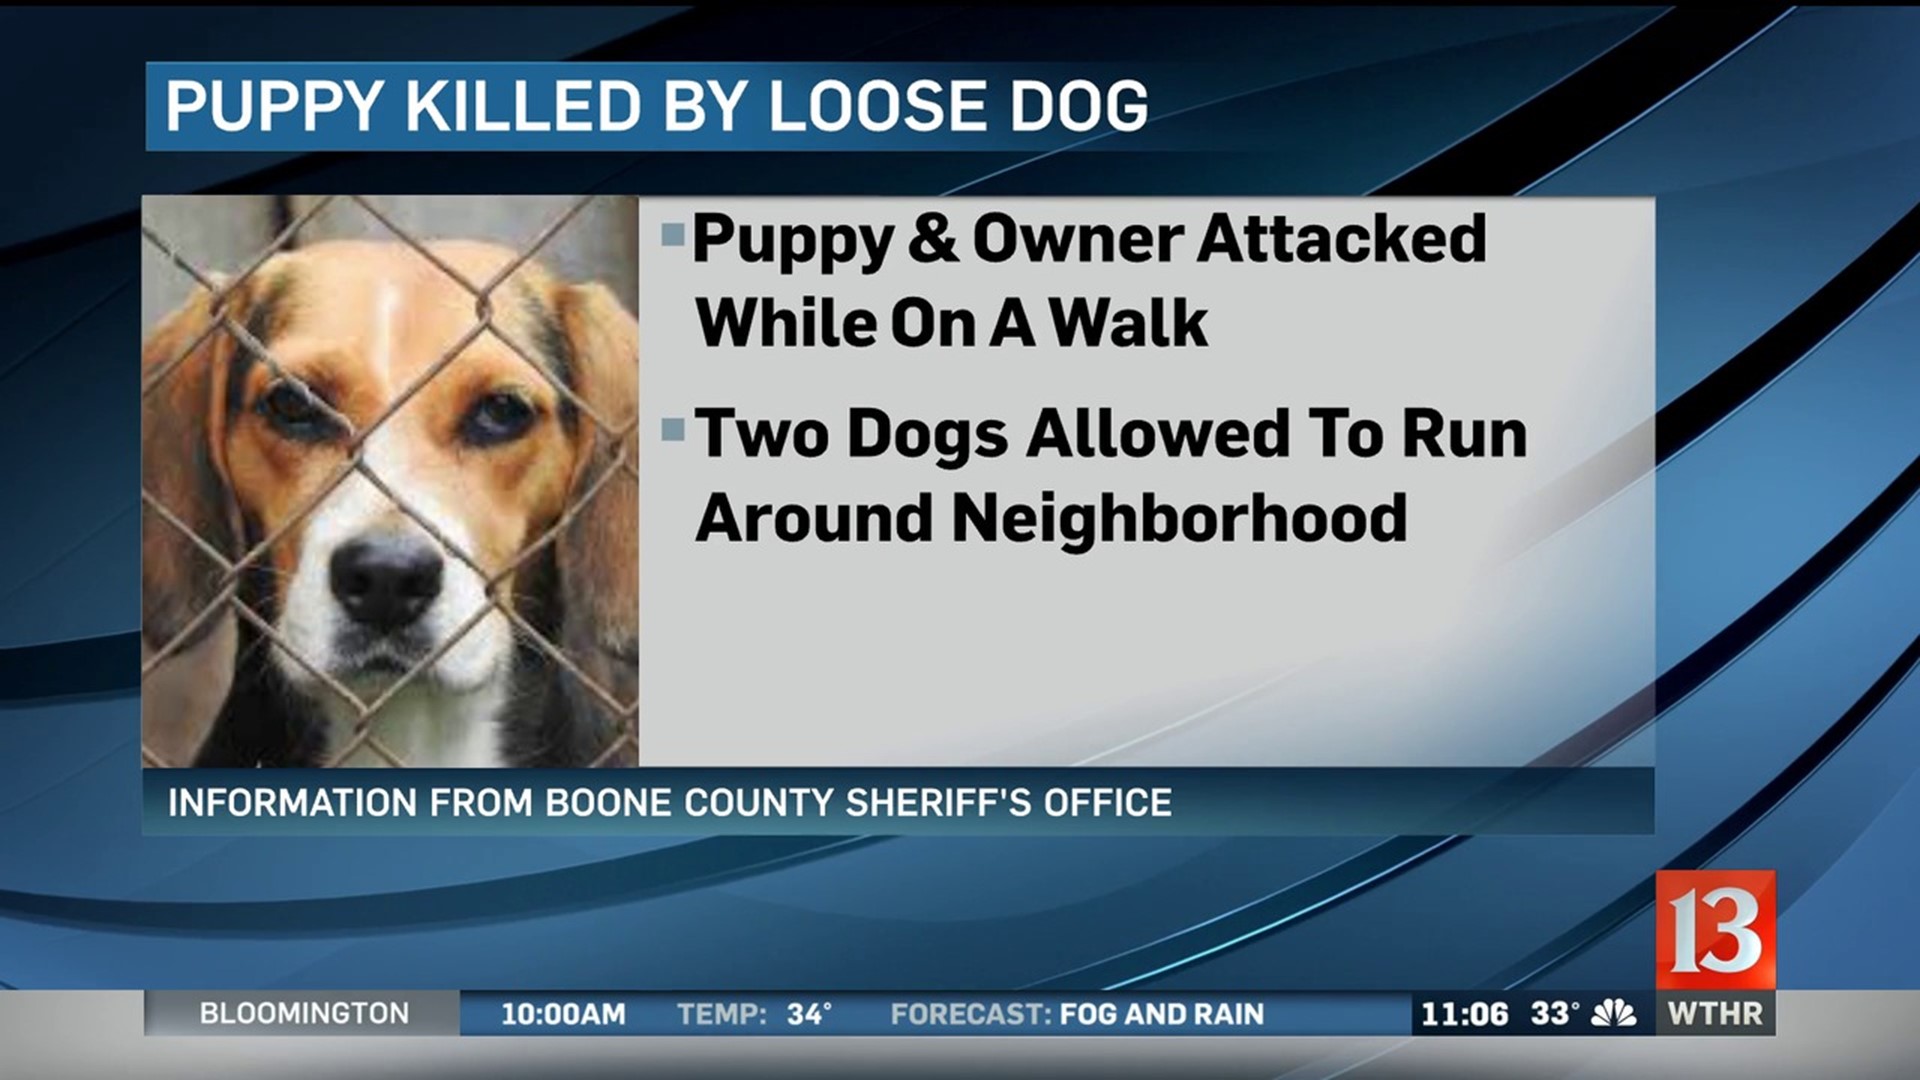 Puppy killed by loose dog in Boone County